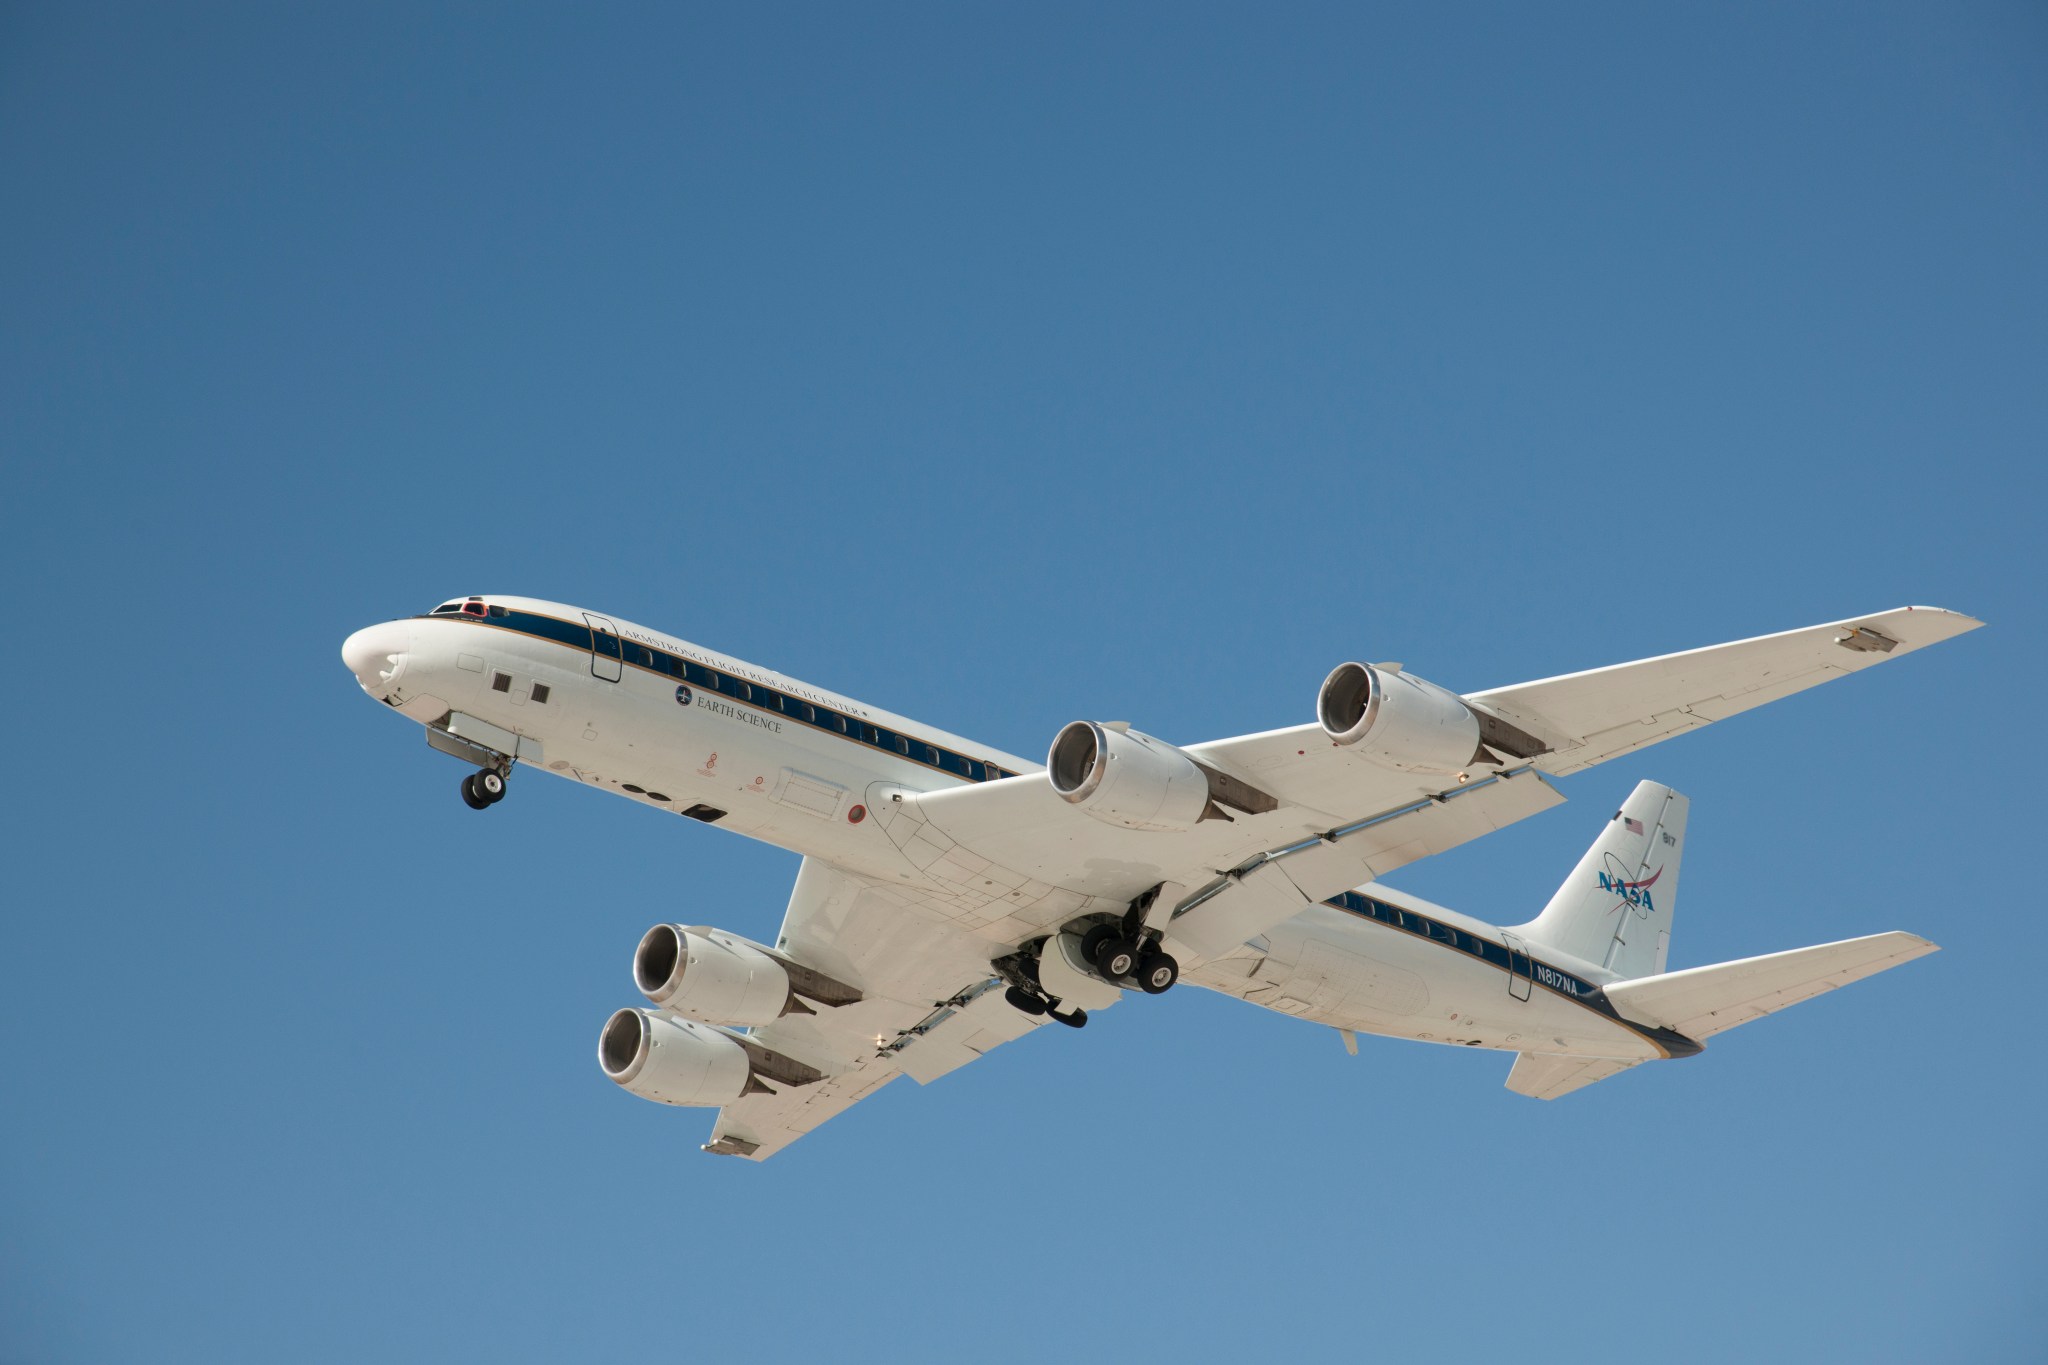 NASA DC-8 science aircraft in flight against clear blue sky.